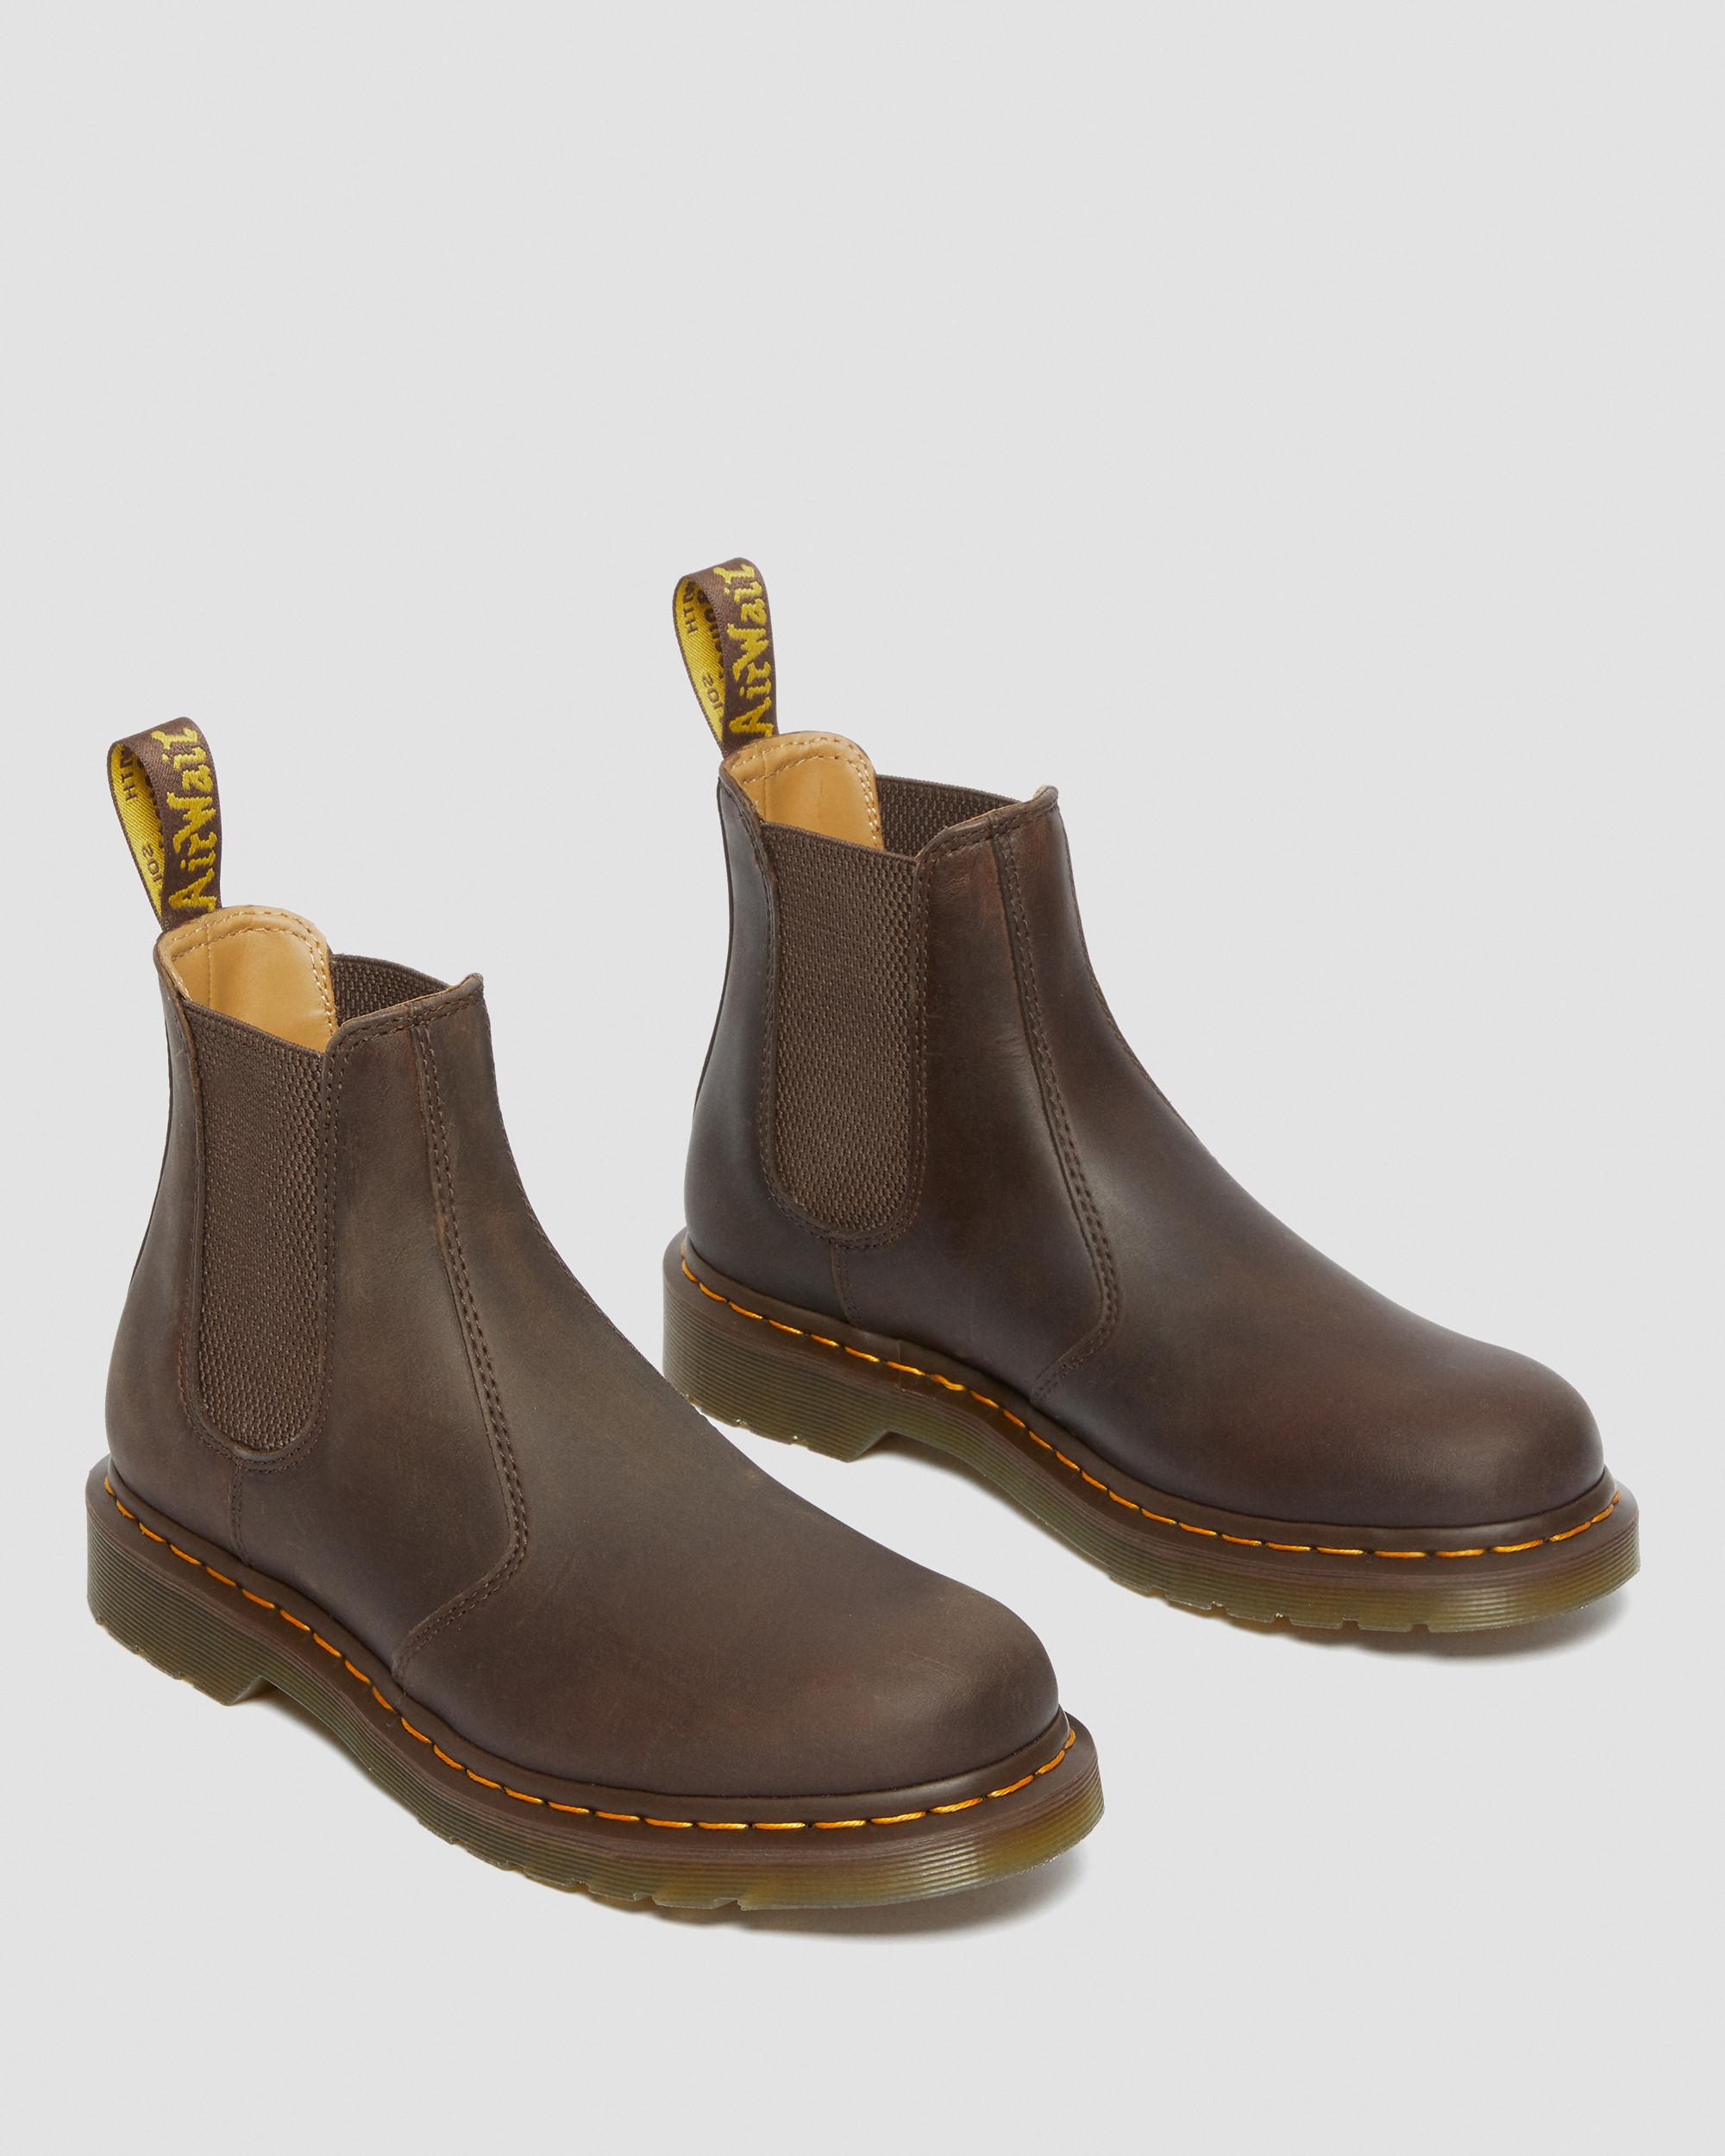 Banzai Modig helikopter 2976 Yellow Stitch Crazy Horse Leather Chelsea Boots | Dr. Martens